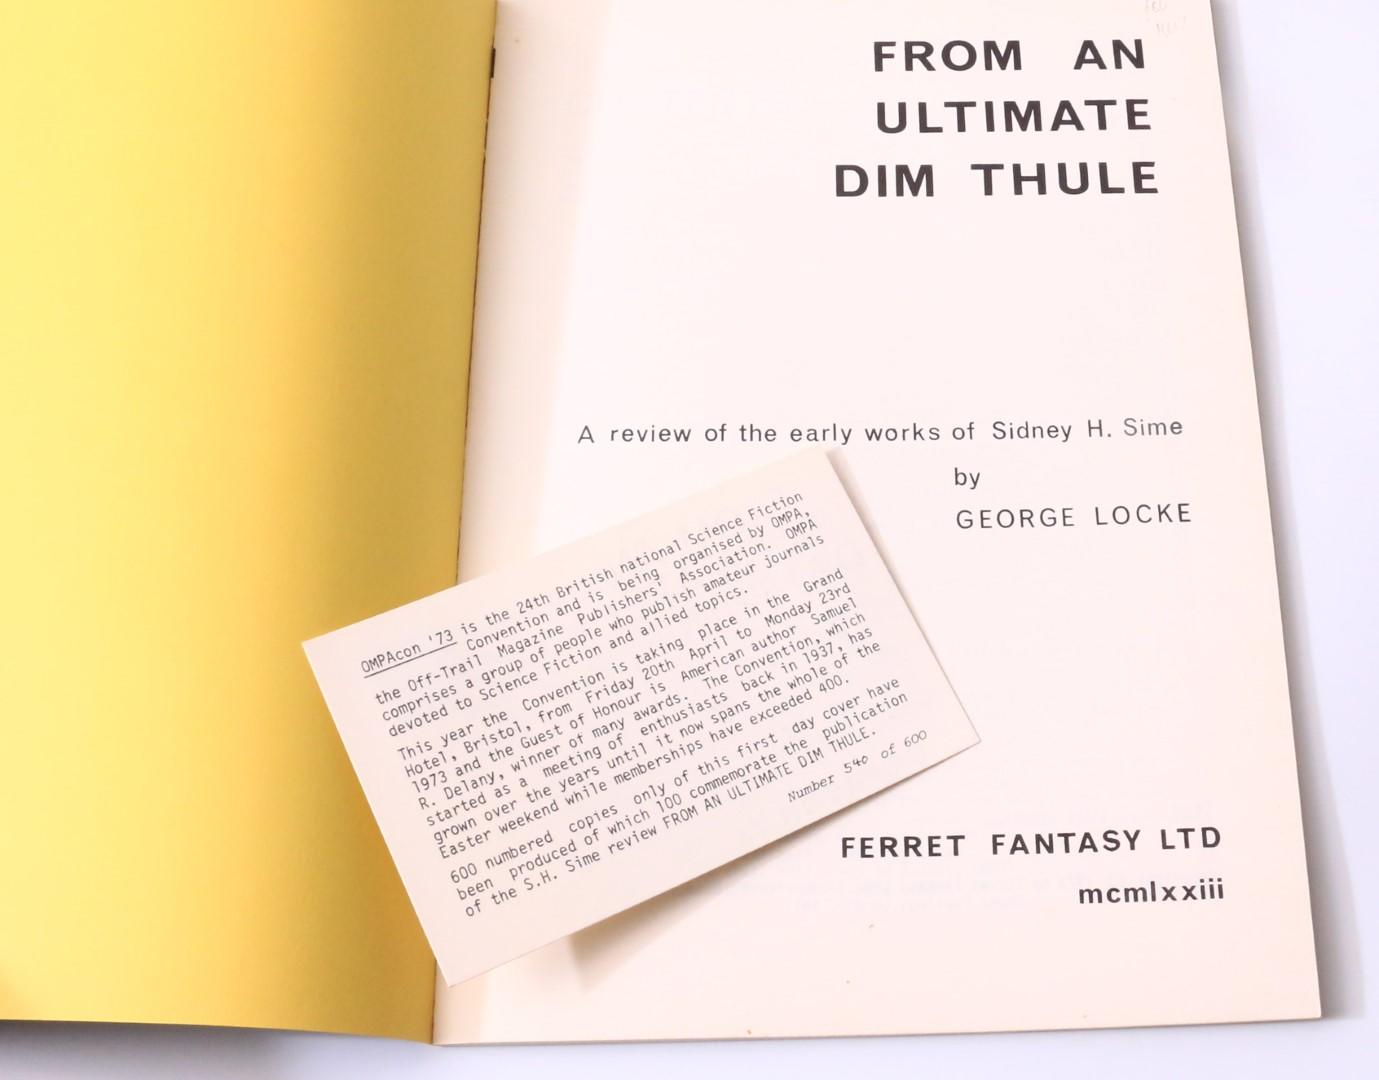 George Locke - From an Ultimate Dim Thule: A Review of the Early Works of Sidney Sime - Ferret Fantasy, 1973, Limited Edition.